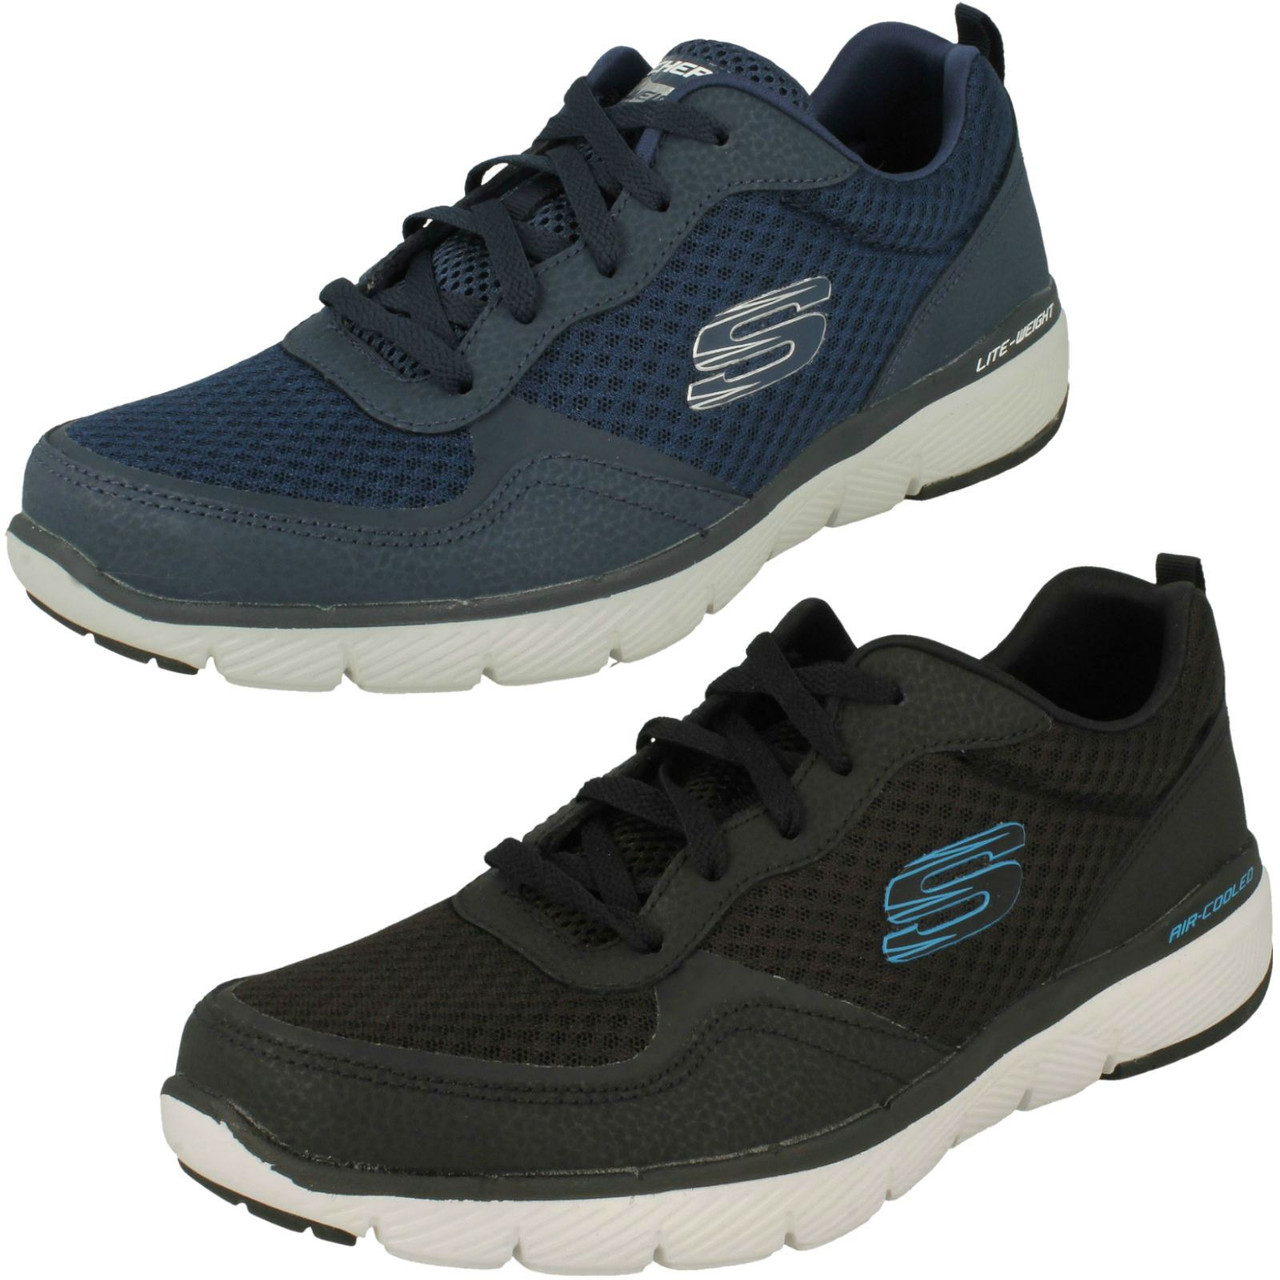 skechers shoes with memory foam review